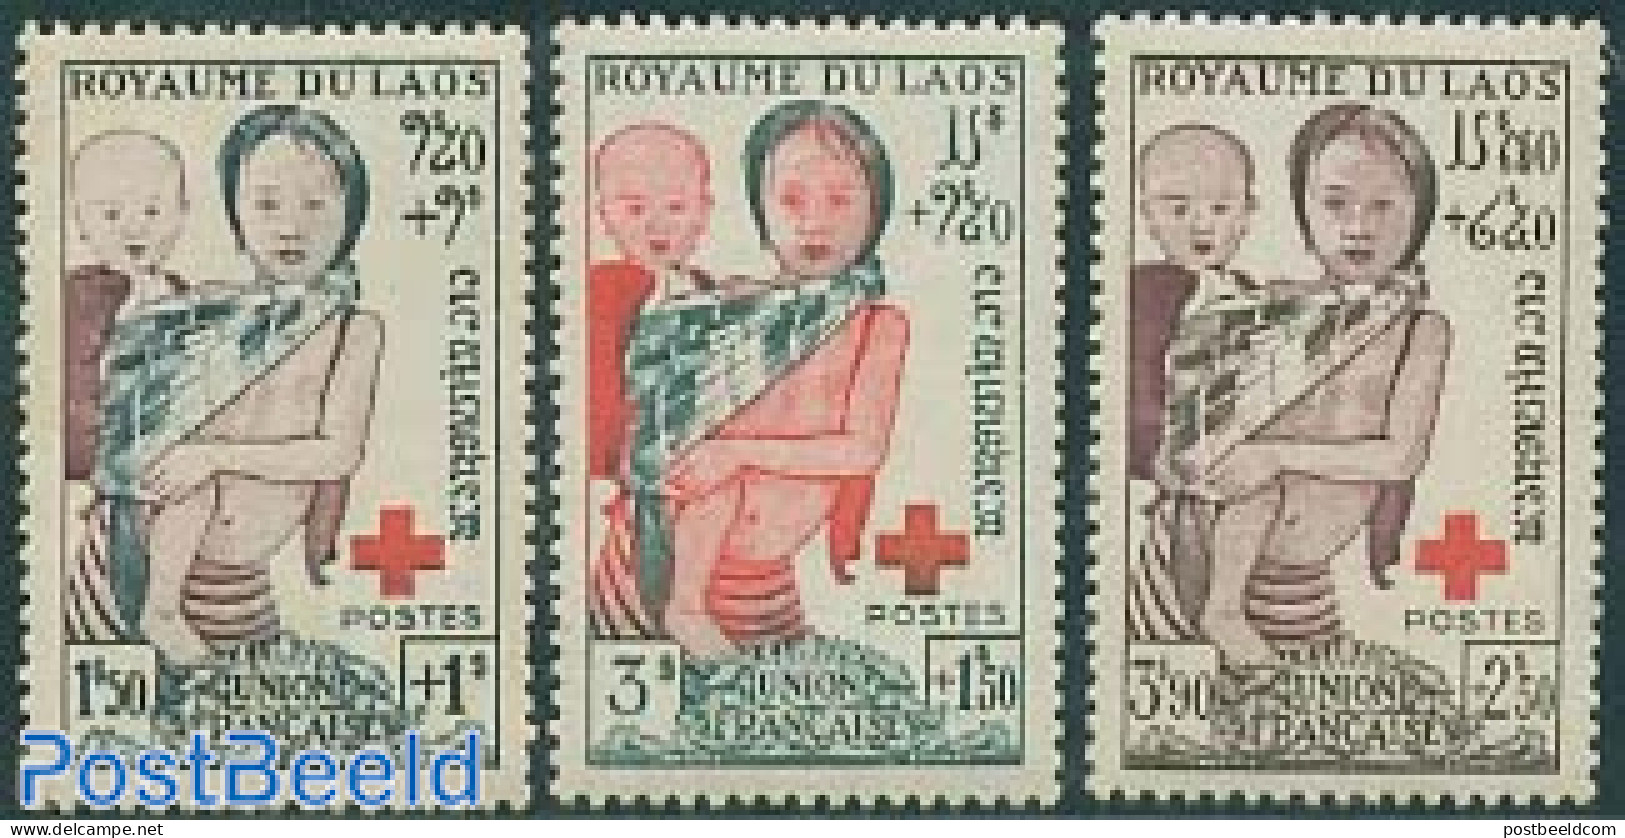 Laos 1953 Red Cross 3v, Mint NH, Health - Red Cross - Croix-Rouge